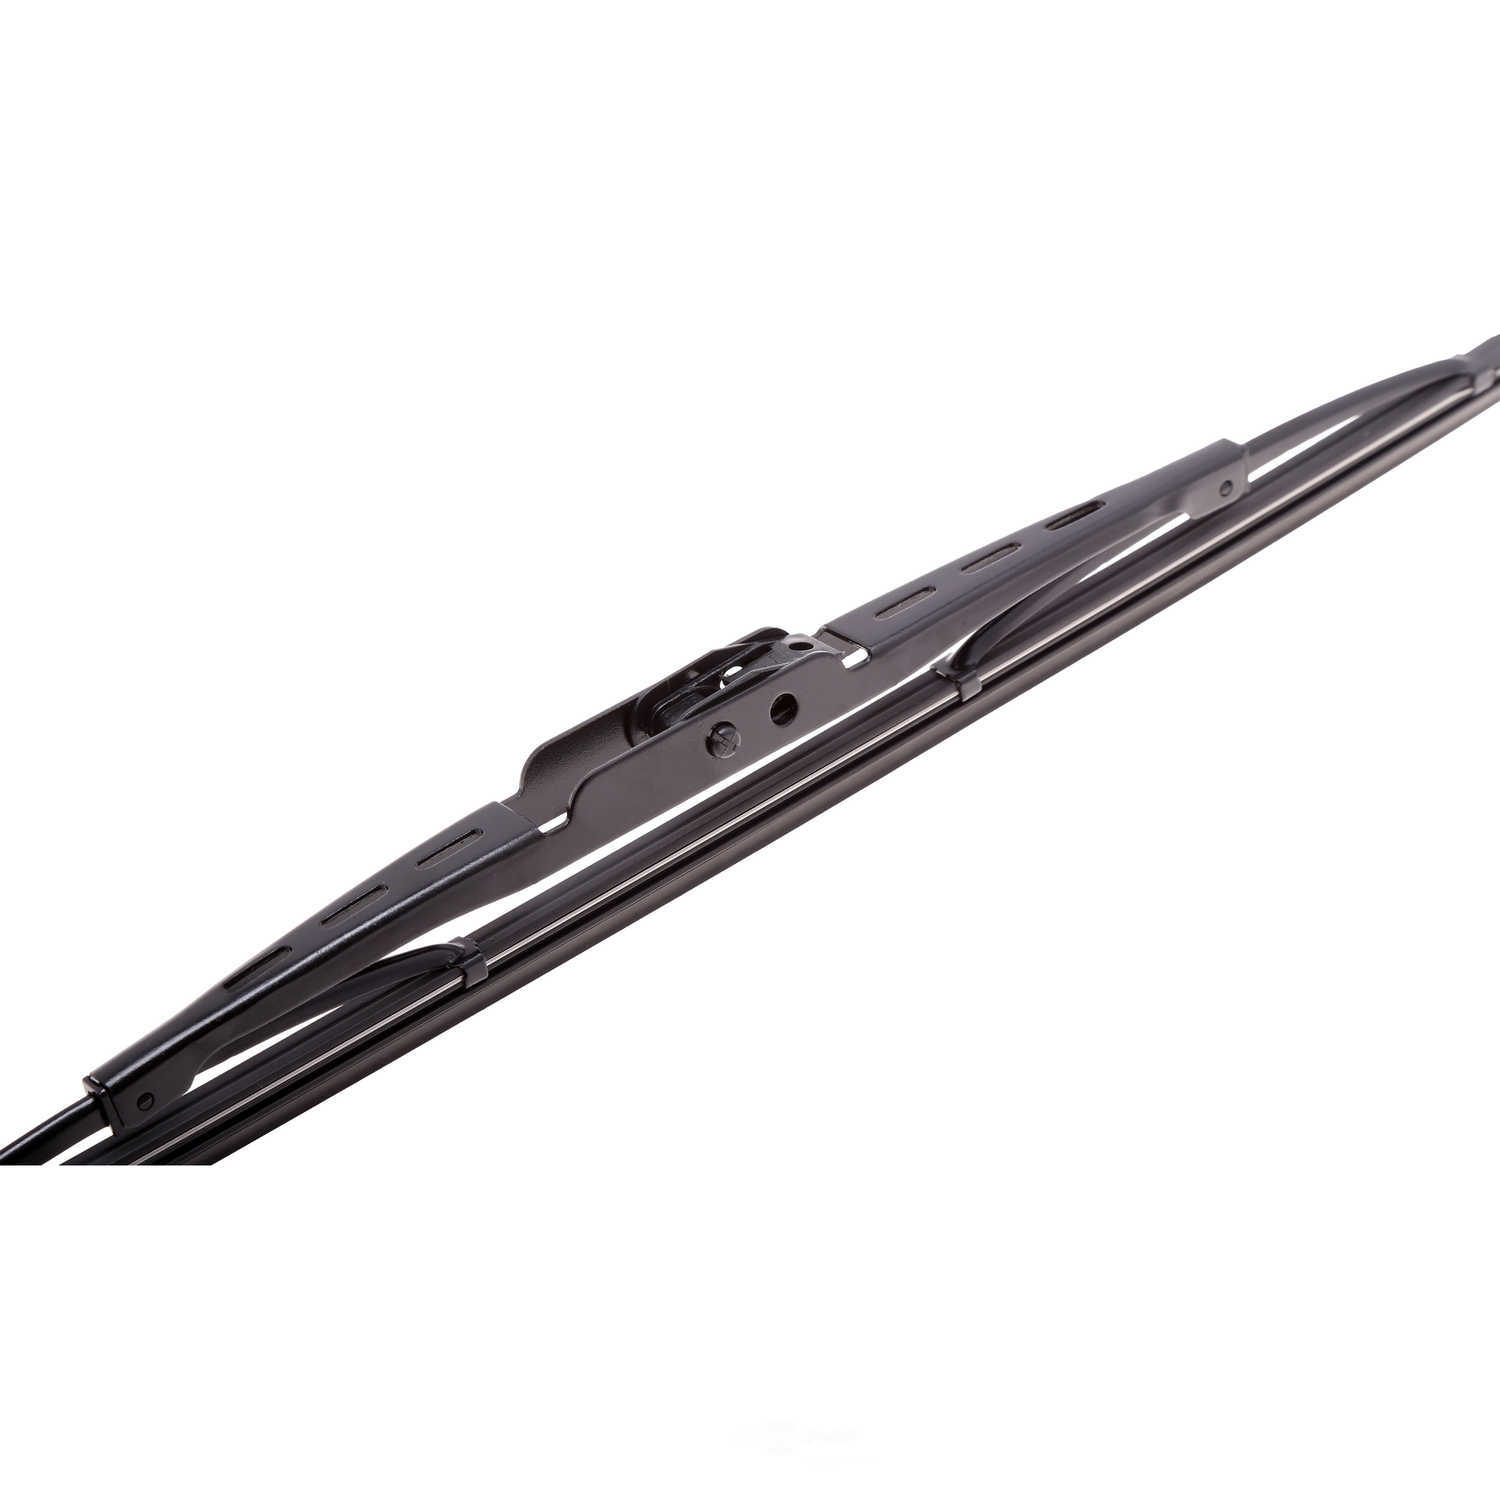 ANCO WIPER PRODUCTS - ANCO 31-Series Wiper Blade (Front Left) - ANC 31-13